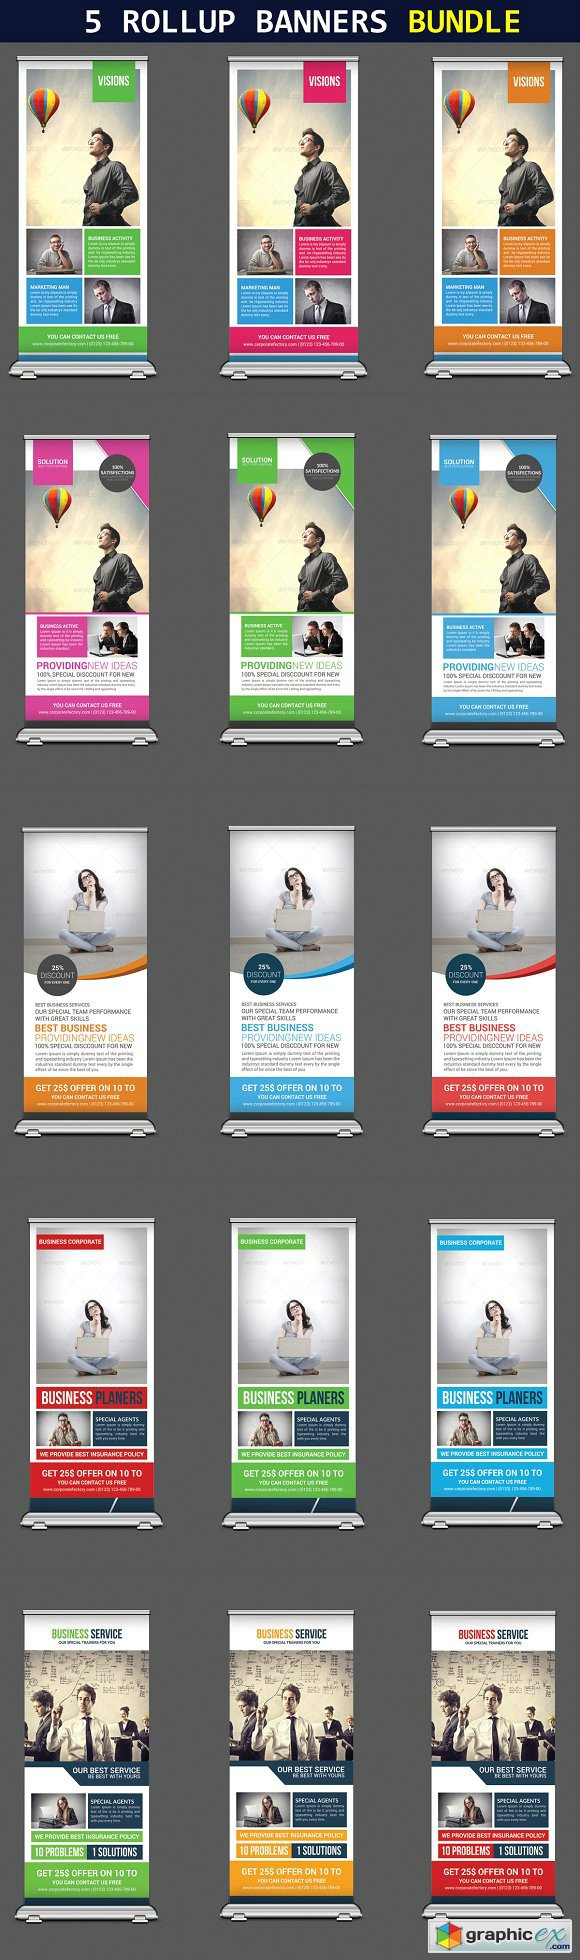 5 Multiuse Business Rollup Banners